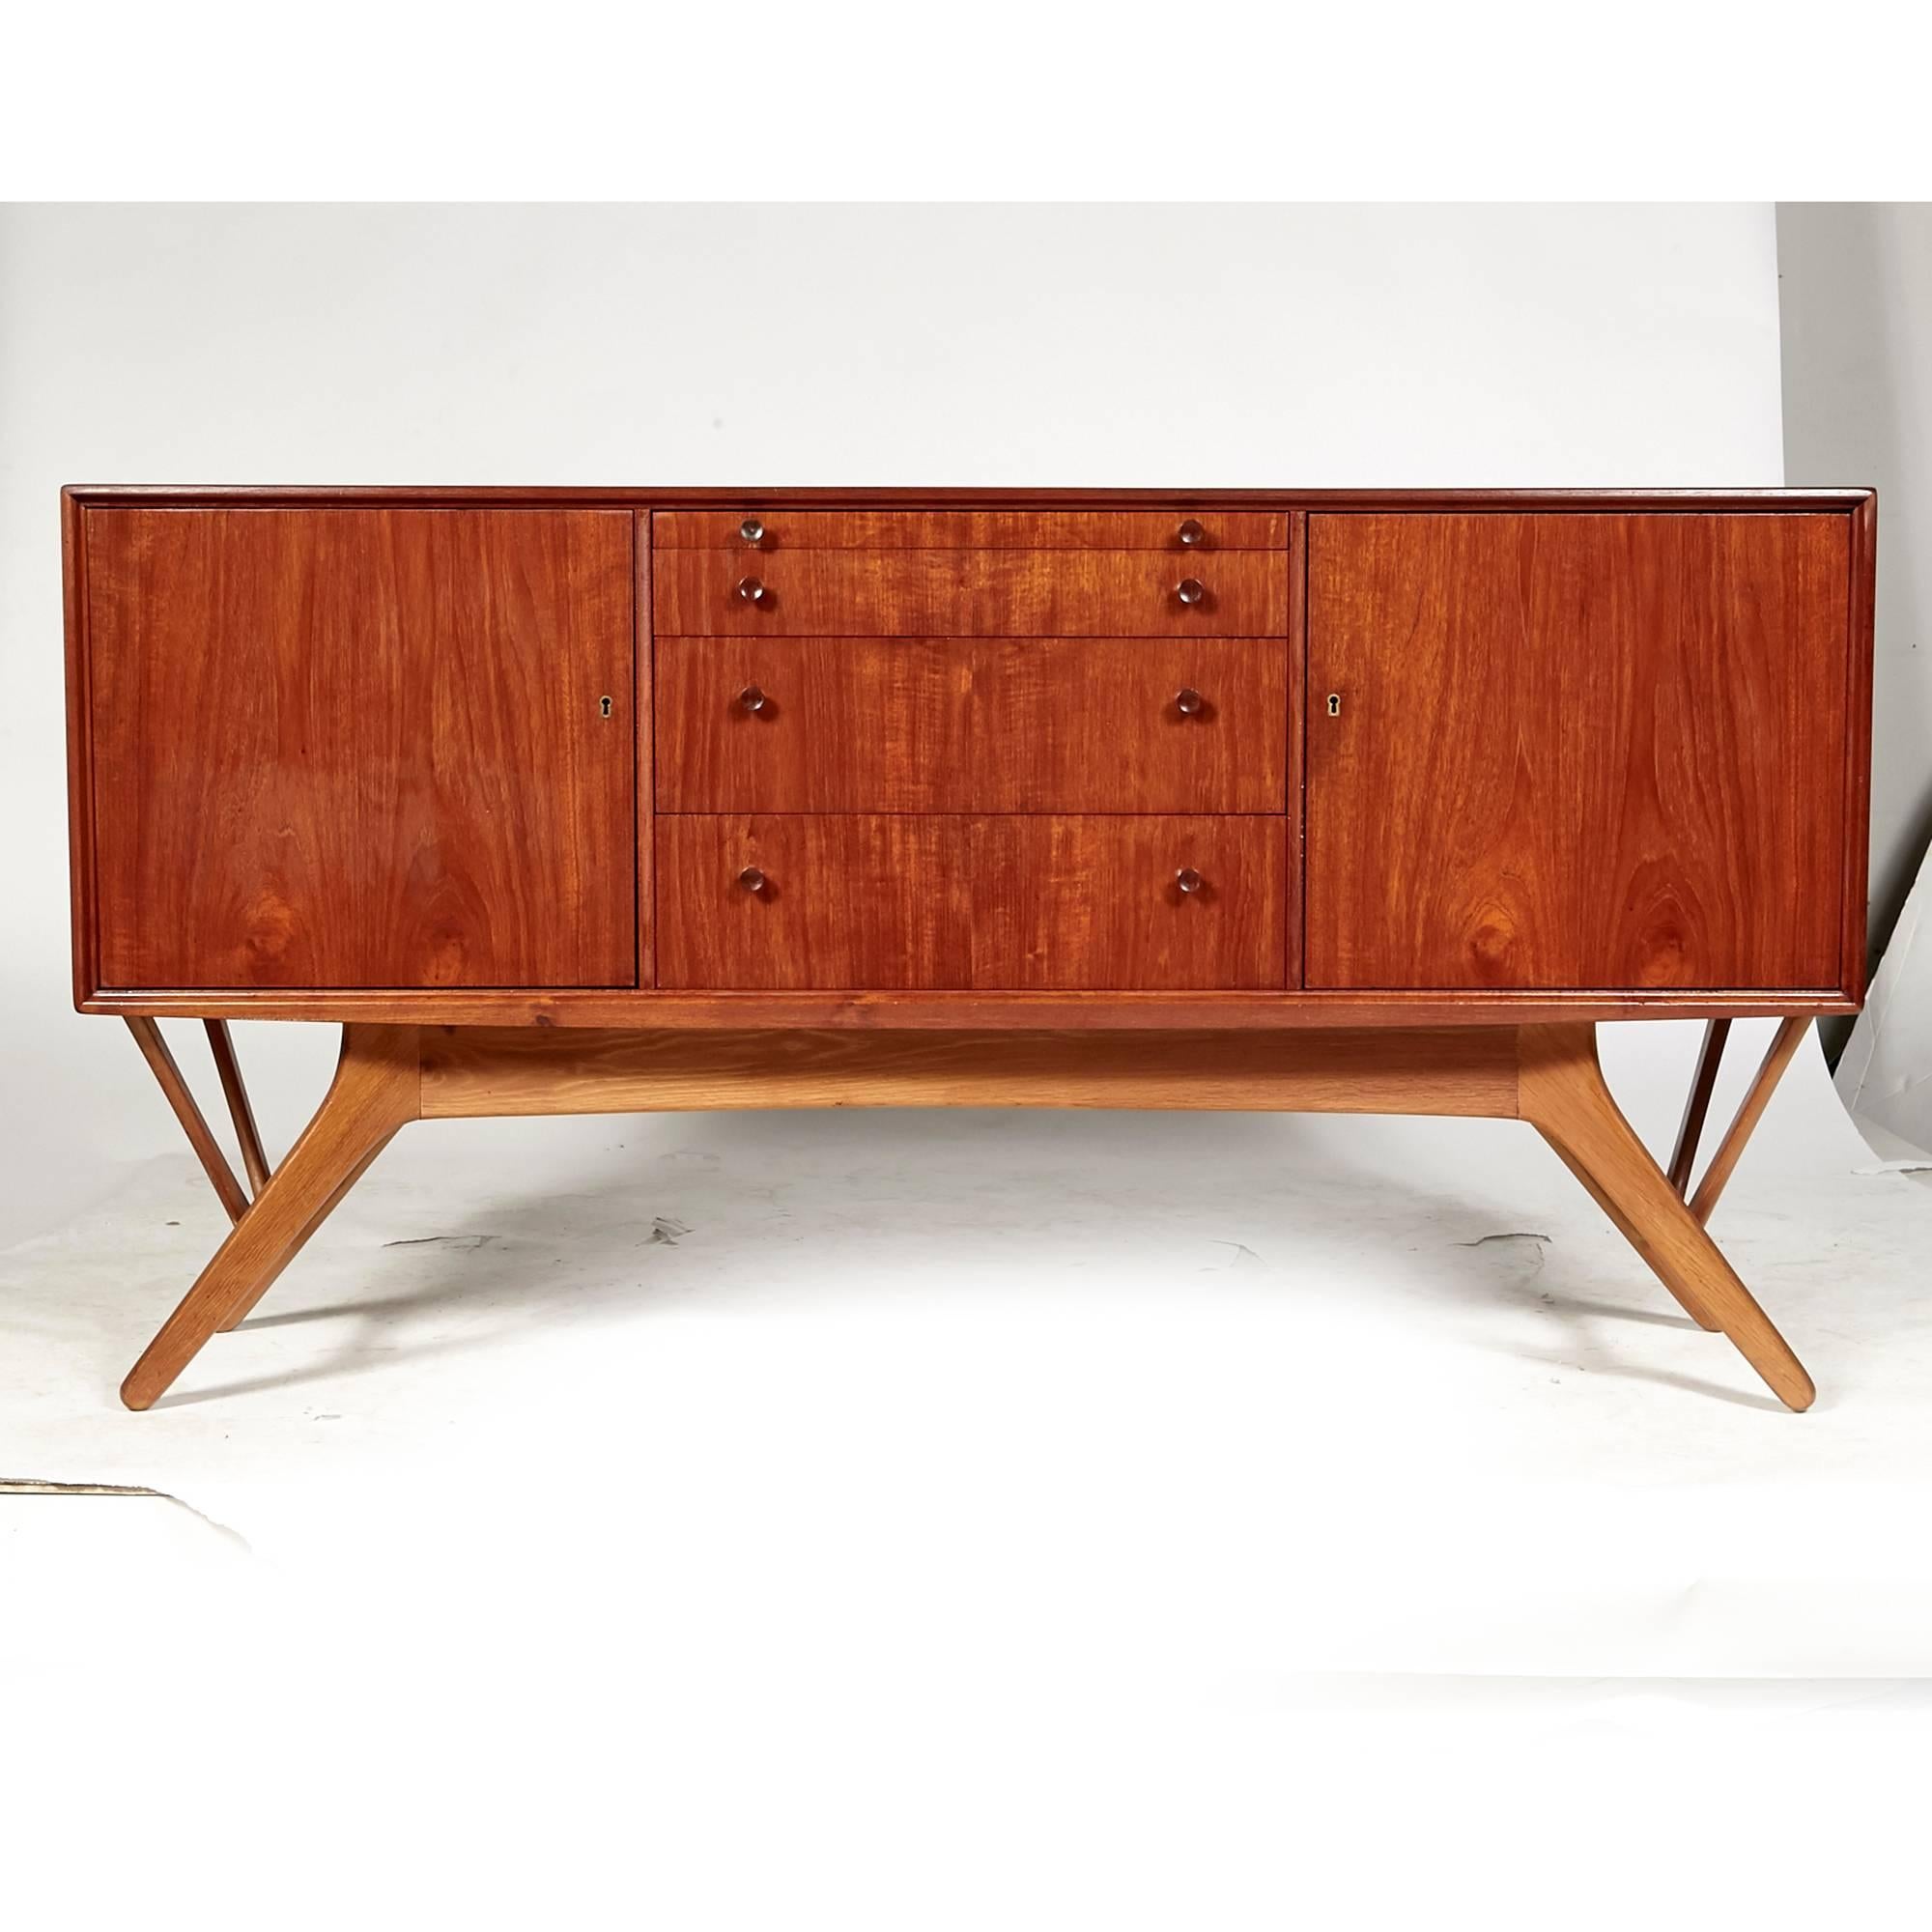 Vintage mid-20th century Danish teak and beechwood angled base credenza, circa 1960s. The tall credenza has drawers and shelving for storage, with round teak pulls. The angled base is in beechwood. Unmarked.